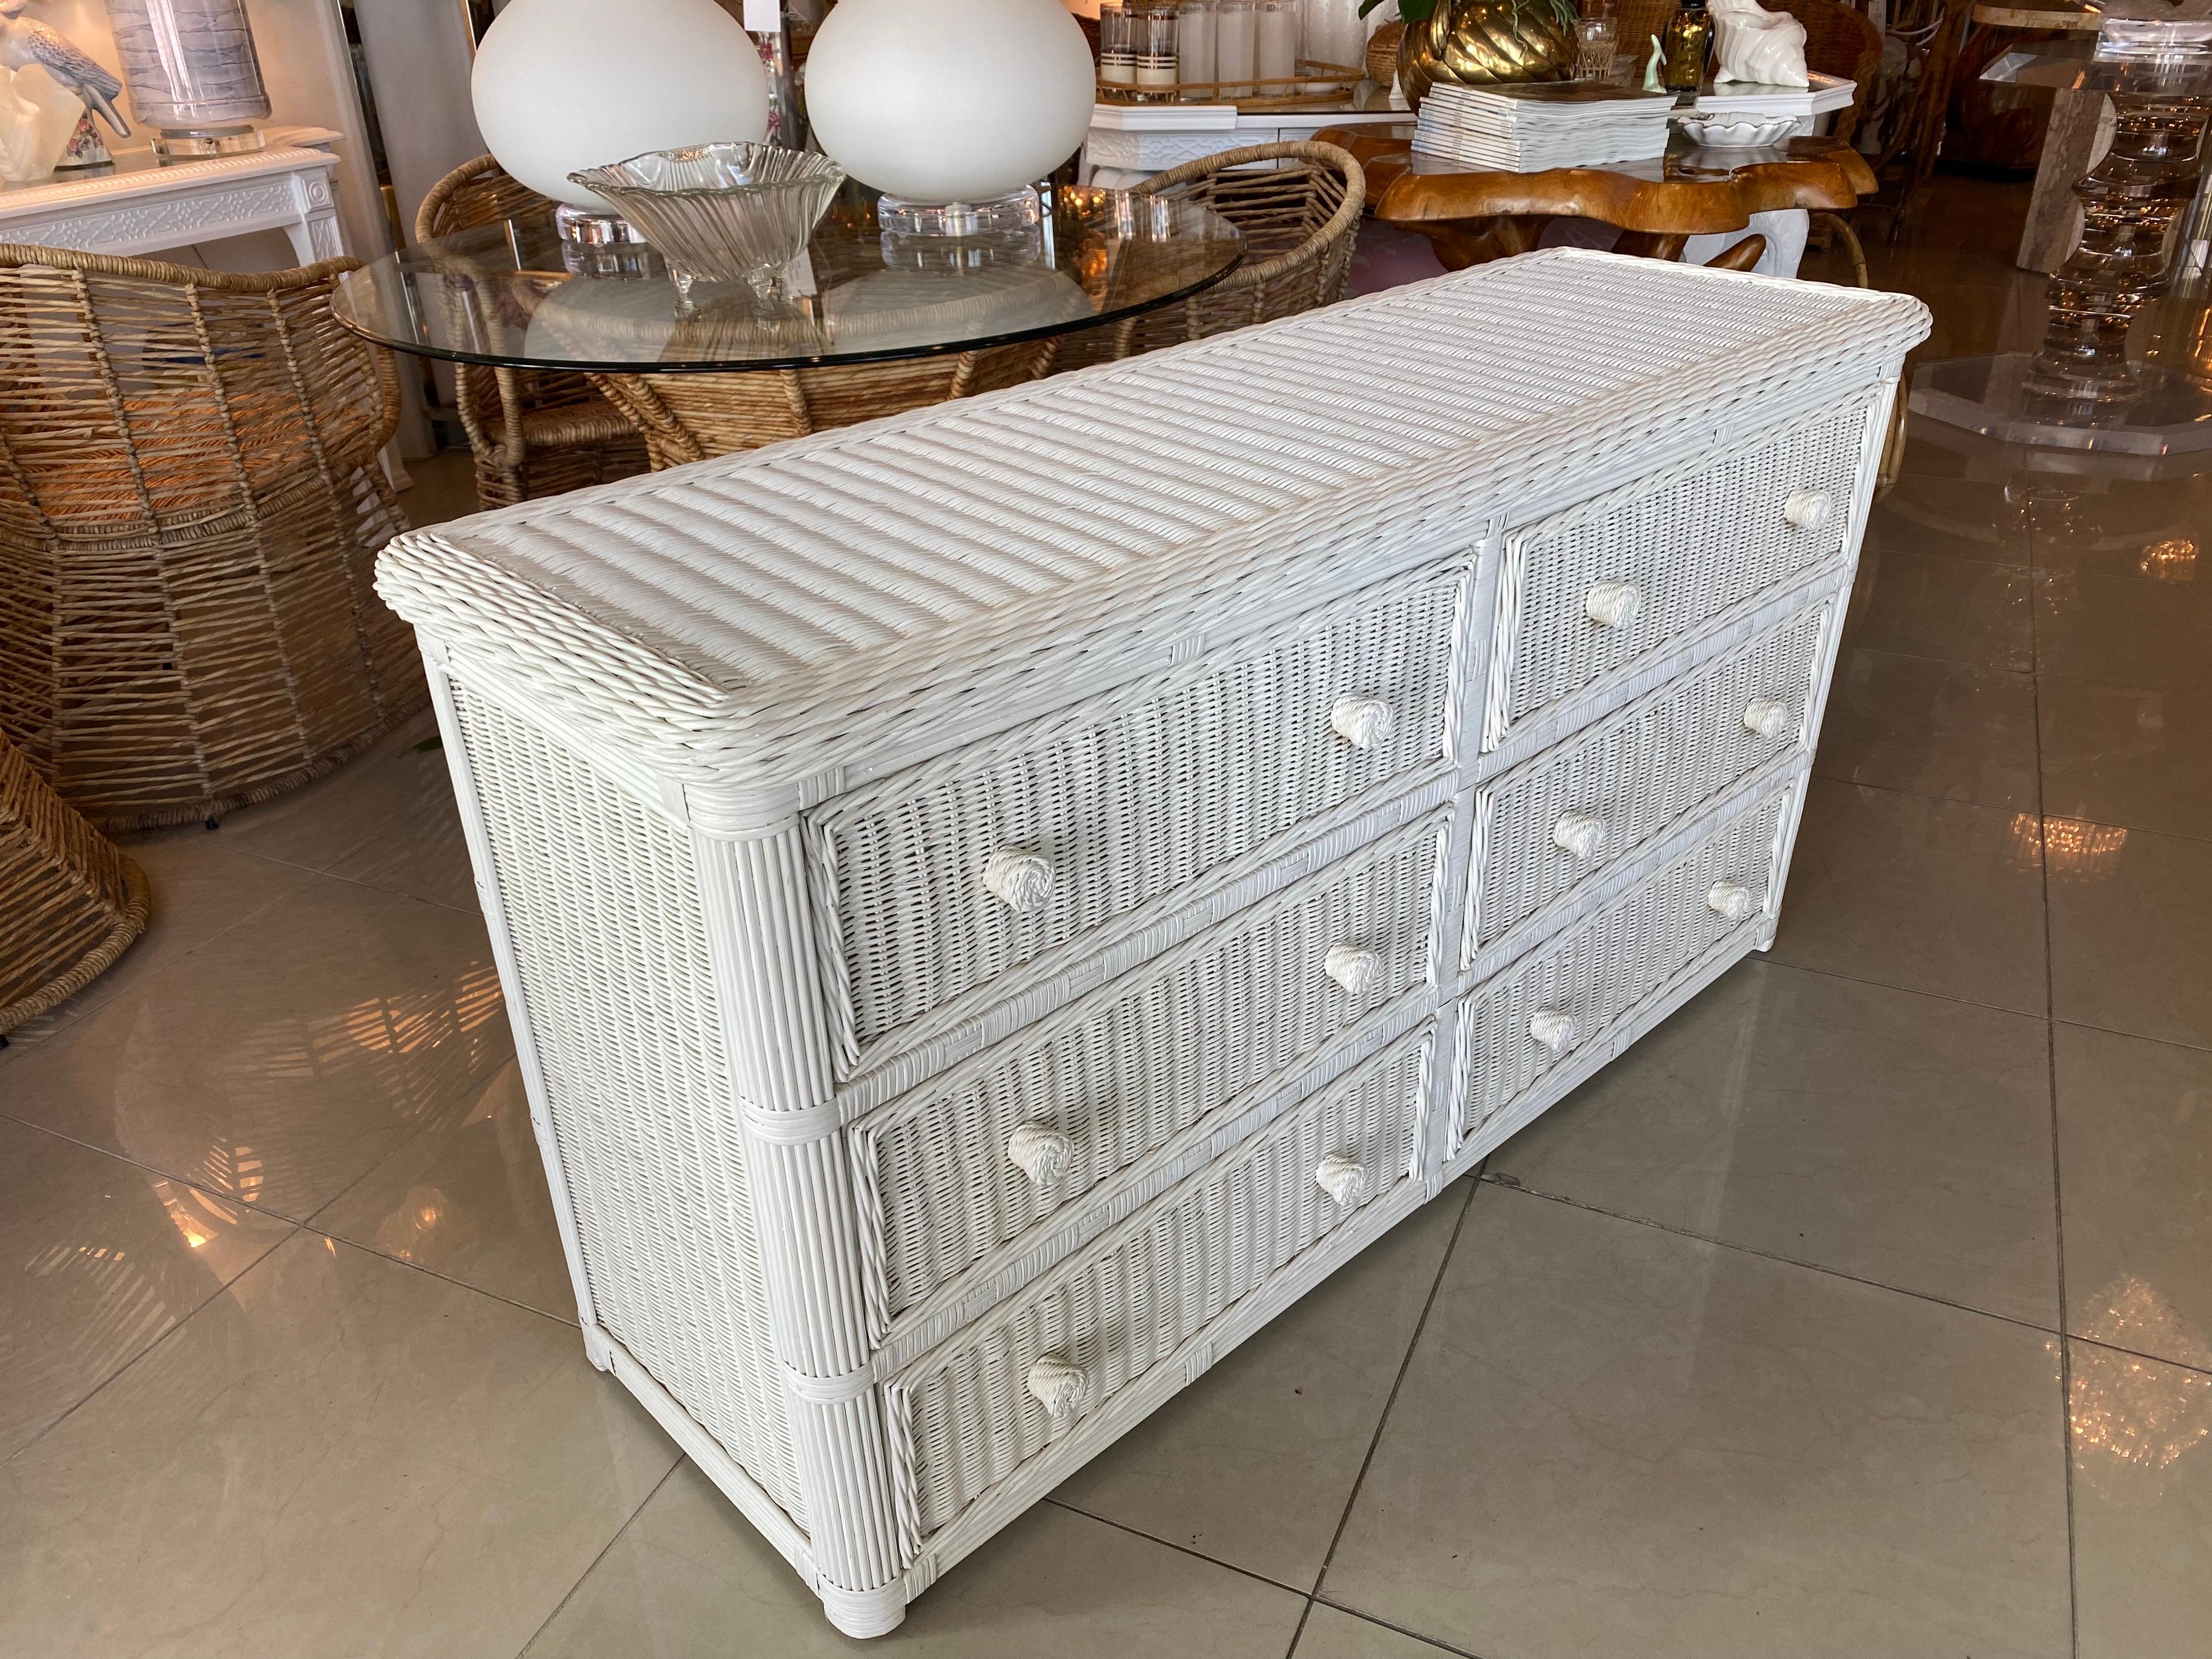 Vintage white wicker dresser with 6 drawers. Wicker is also on both sides and top. White finish is original and may have slight wear. Glass top is also included for the top of dresser.
Dimensions: 54 L x 18 D x 29 H.